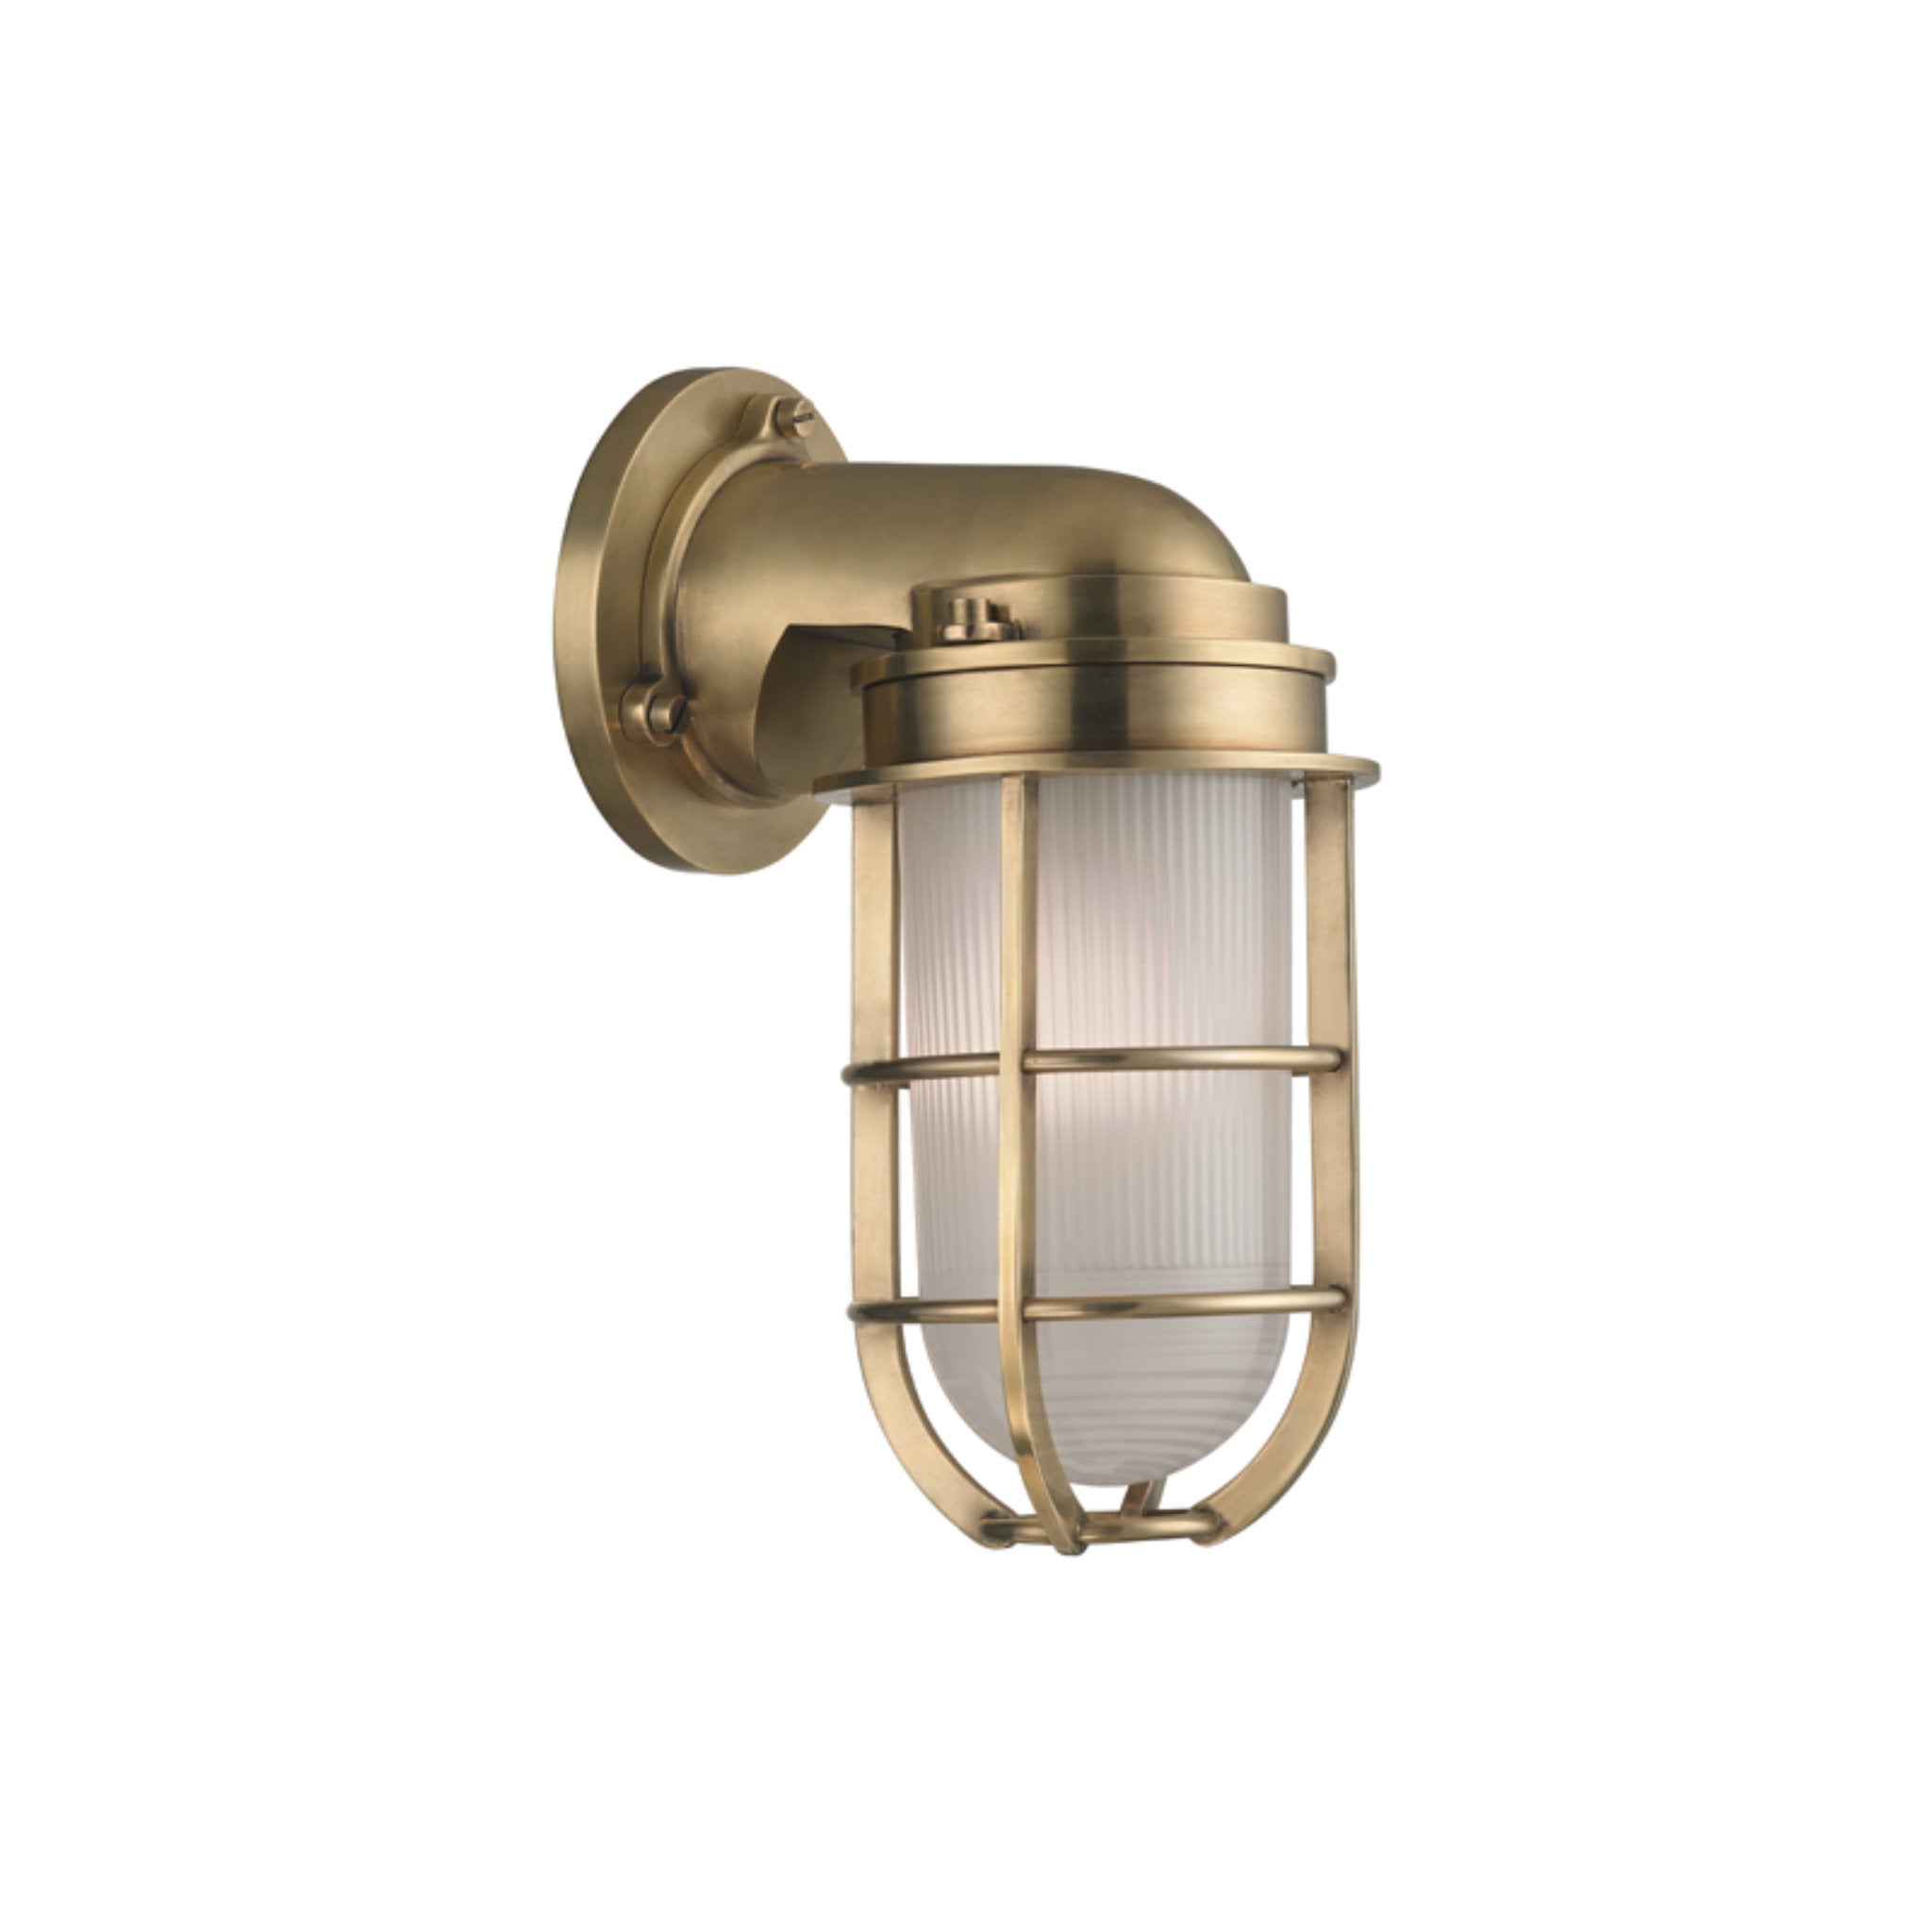 Carson 1 Light Wall Sconce in Aged Brass